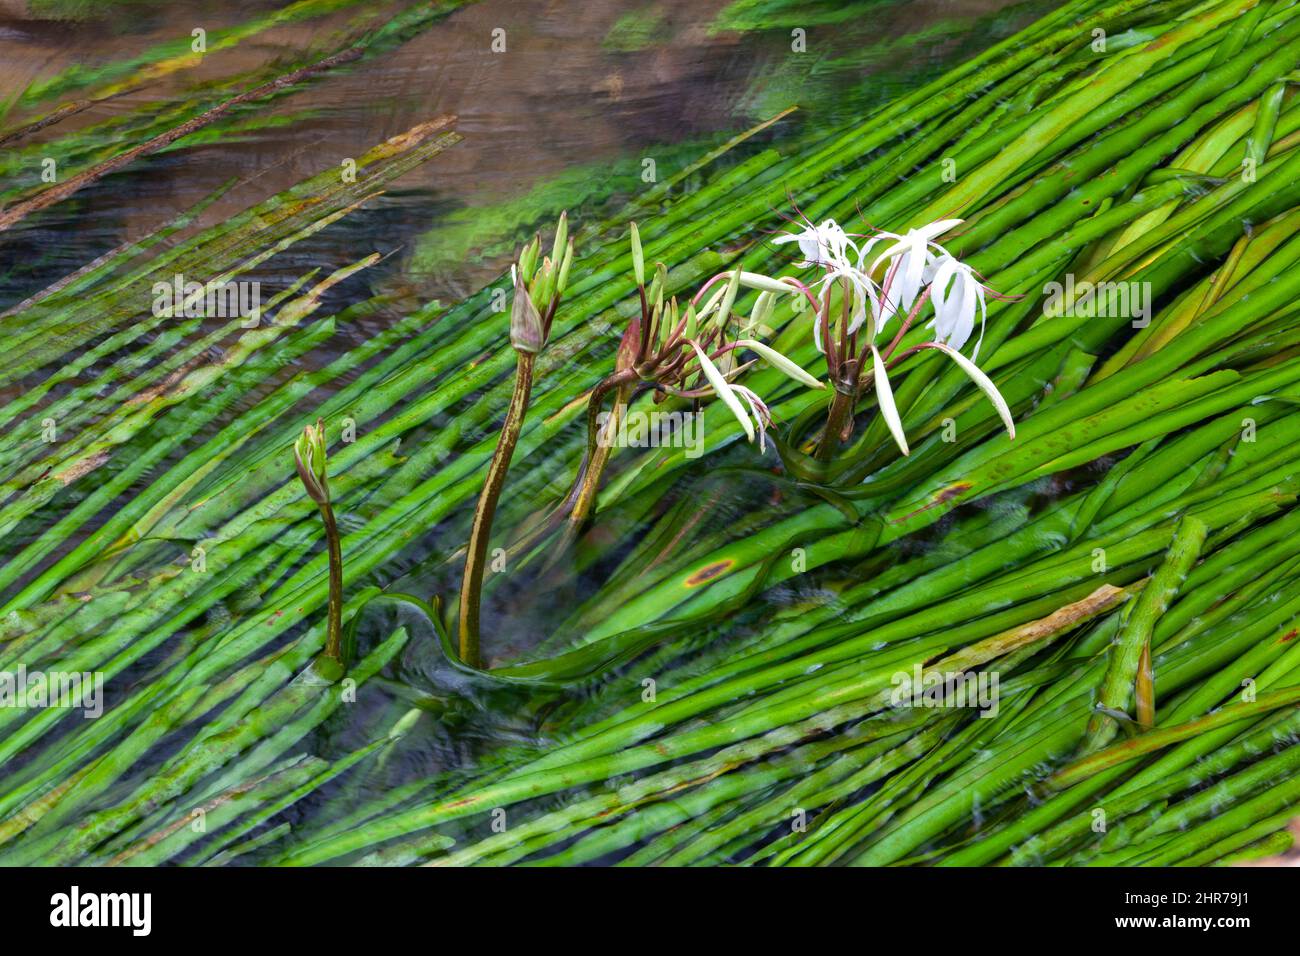 Crinum thaianum (Thai onion plant, Water onion, Onion plant) is an endangered species of flowering plant of the family amaryllidaceae, endemic to the Stock Photo